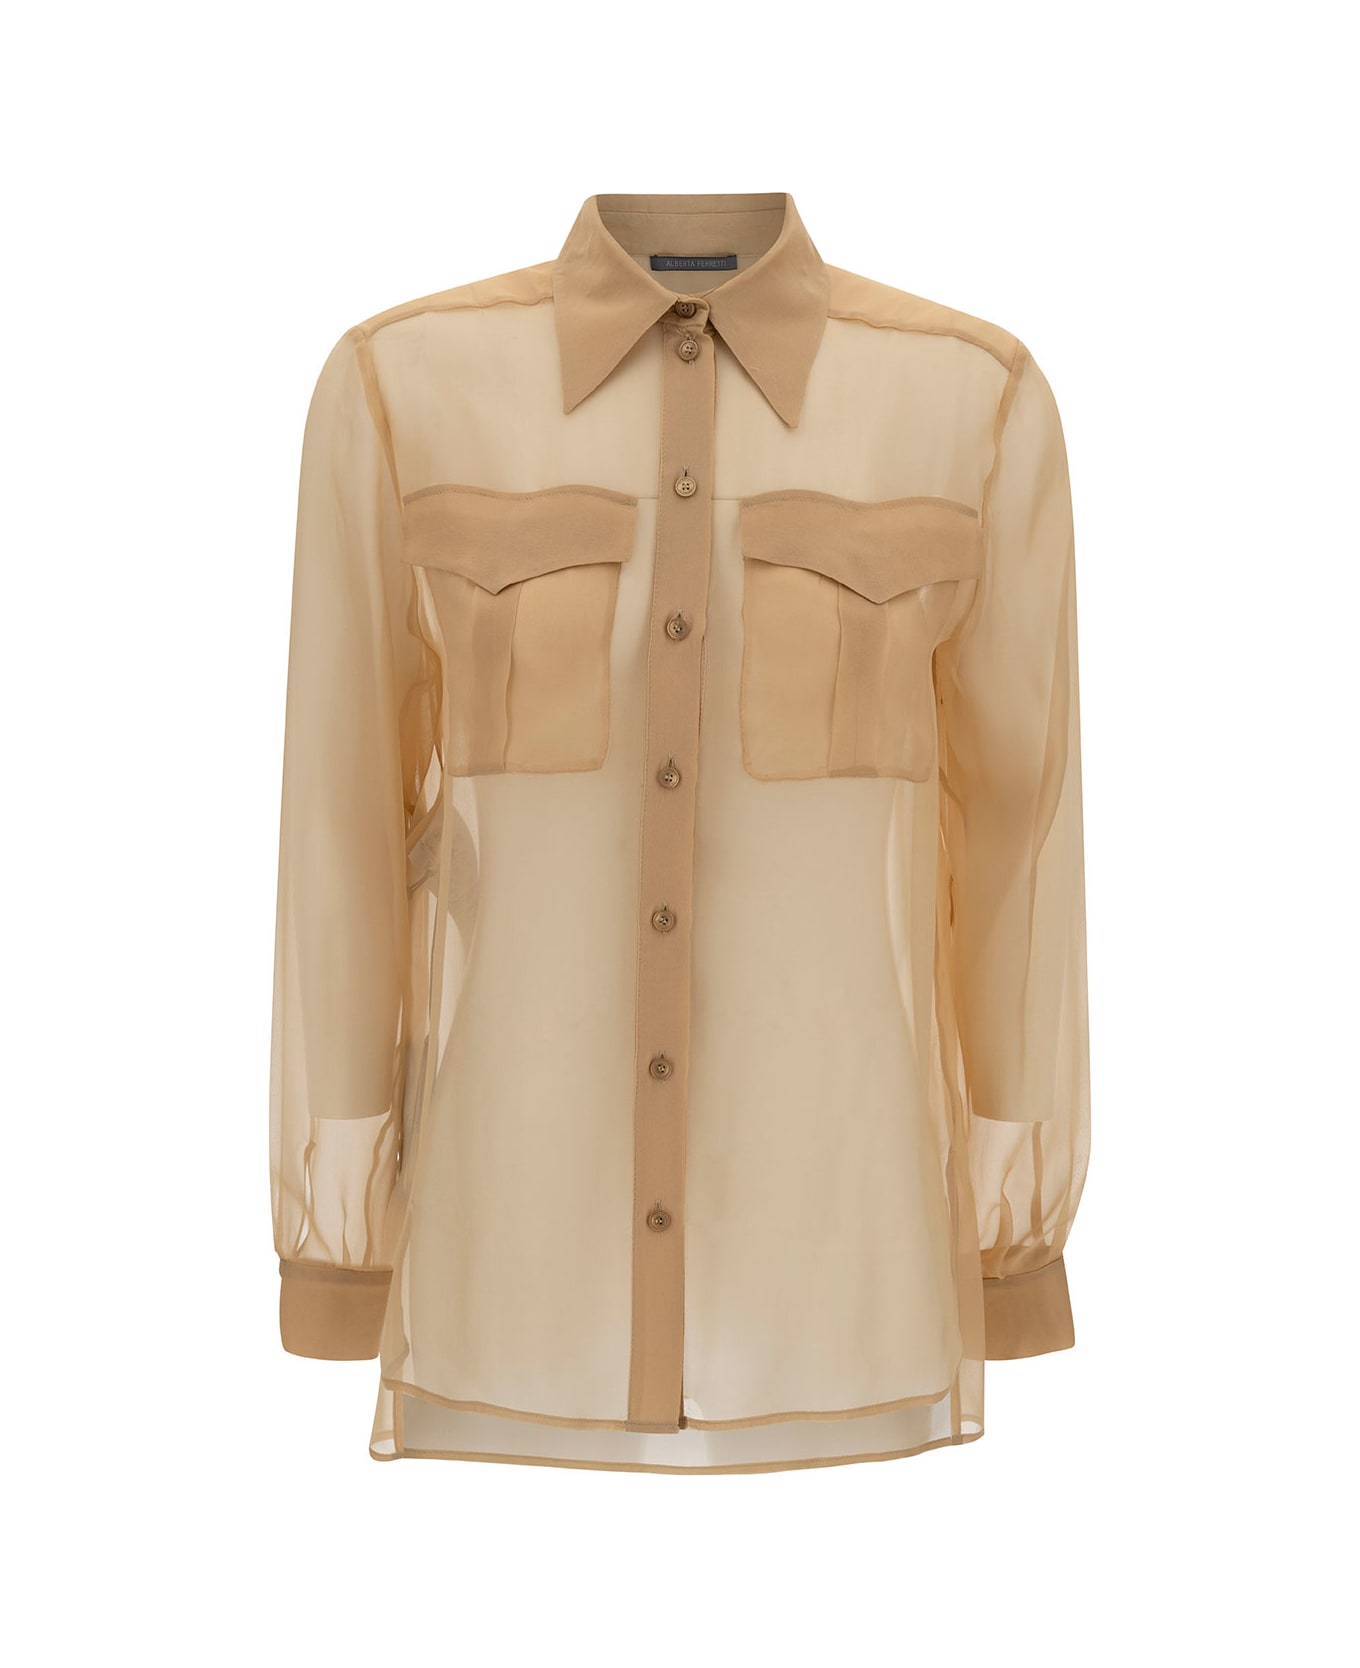 Alberta Ferretti Beige Shirt With Pointed Collar And Patch Pockets In Silk Chiffon Woman - Beige シャツ